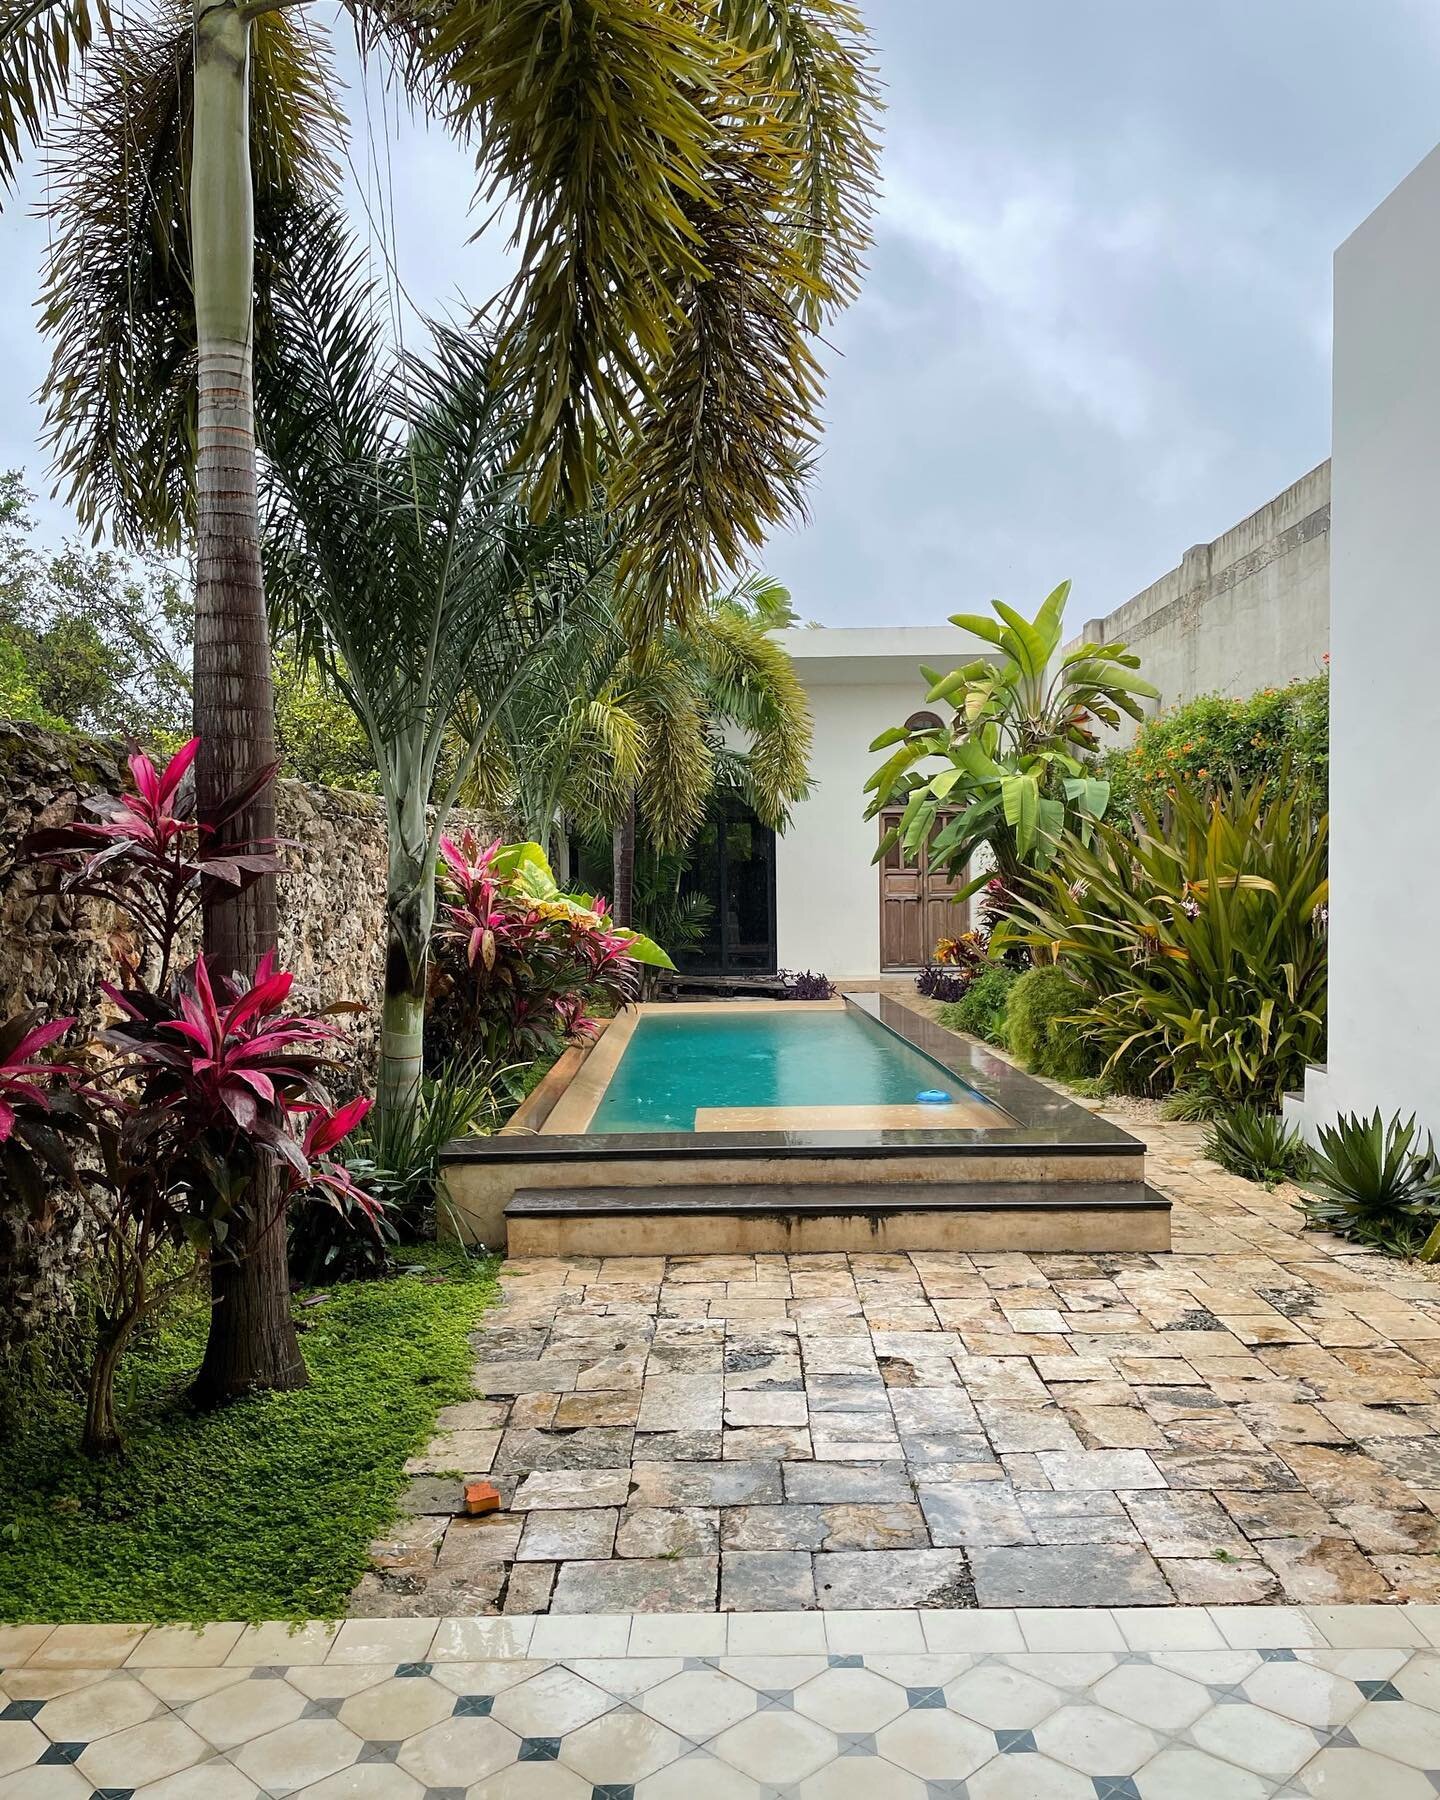 I wanted to share a personal AGI project with you guys. To give you a little bit of a backstory:

Last year, we found the opportunity to buy a home in Merida, Mexico to use as an easy getaway for us, family, and friends.

We decided to undertake some